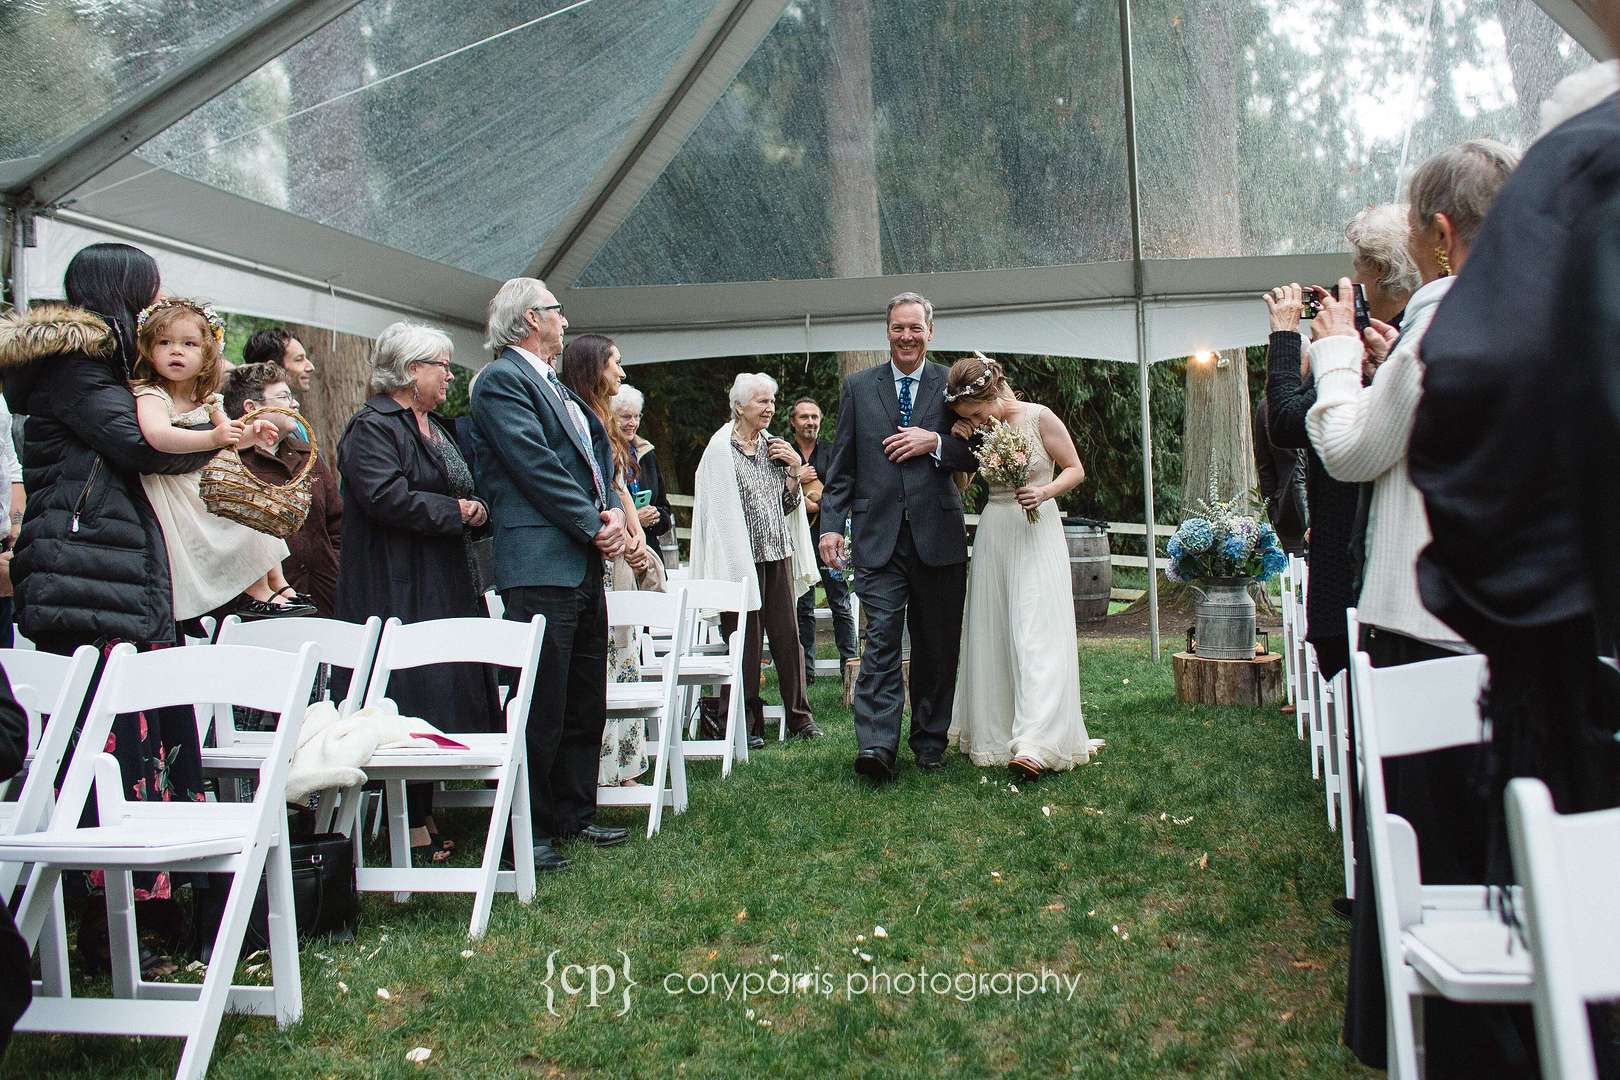 I love this image of Sonya putting her head on her dad's shoulder as they walk down the aisle before the wedding.